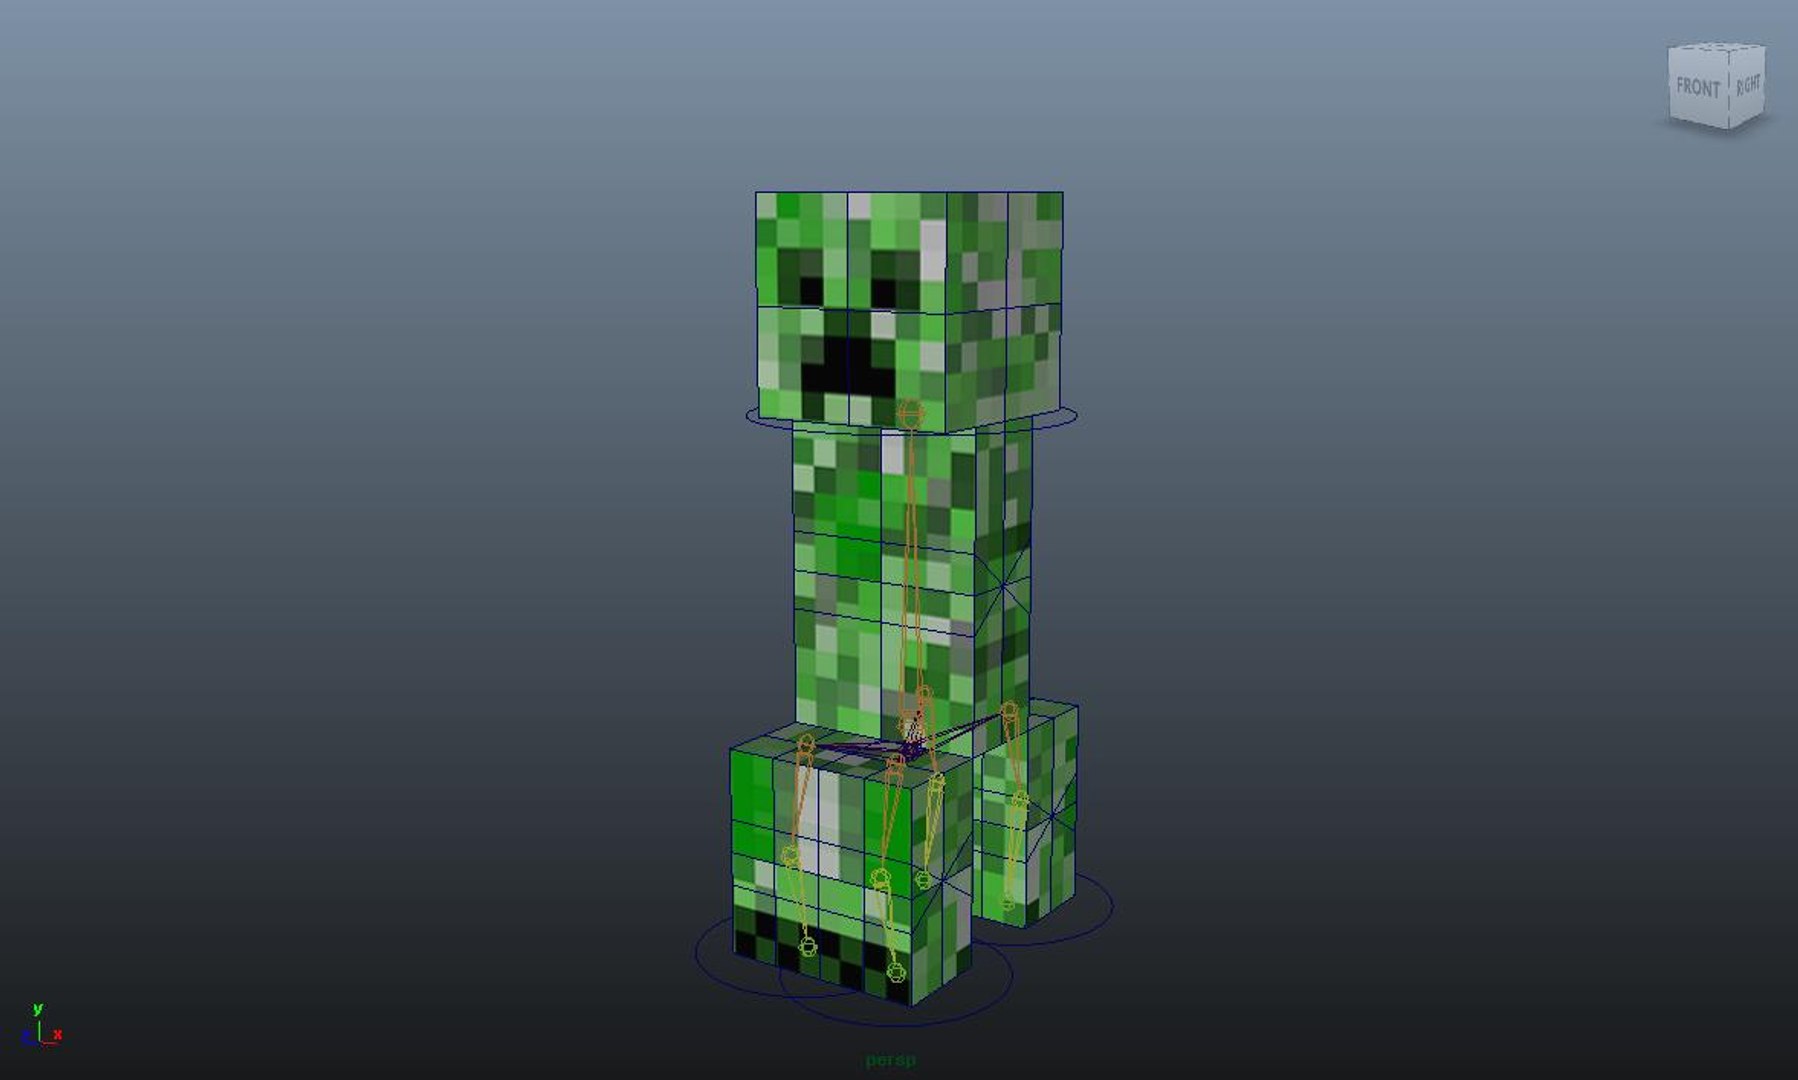 3D model Minecraft Creeper Deluxe VR / AR / low-poly